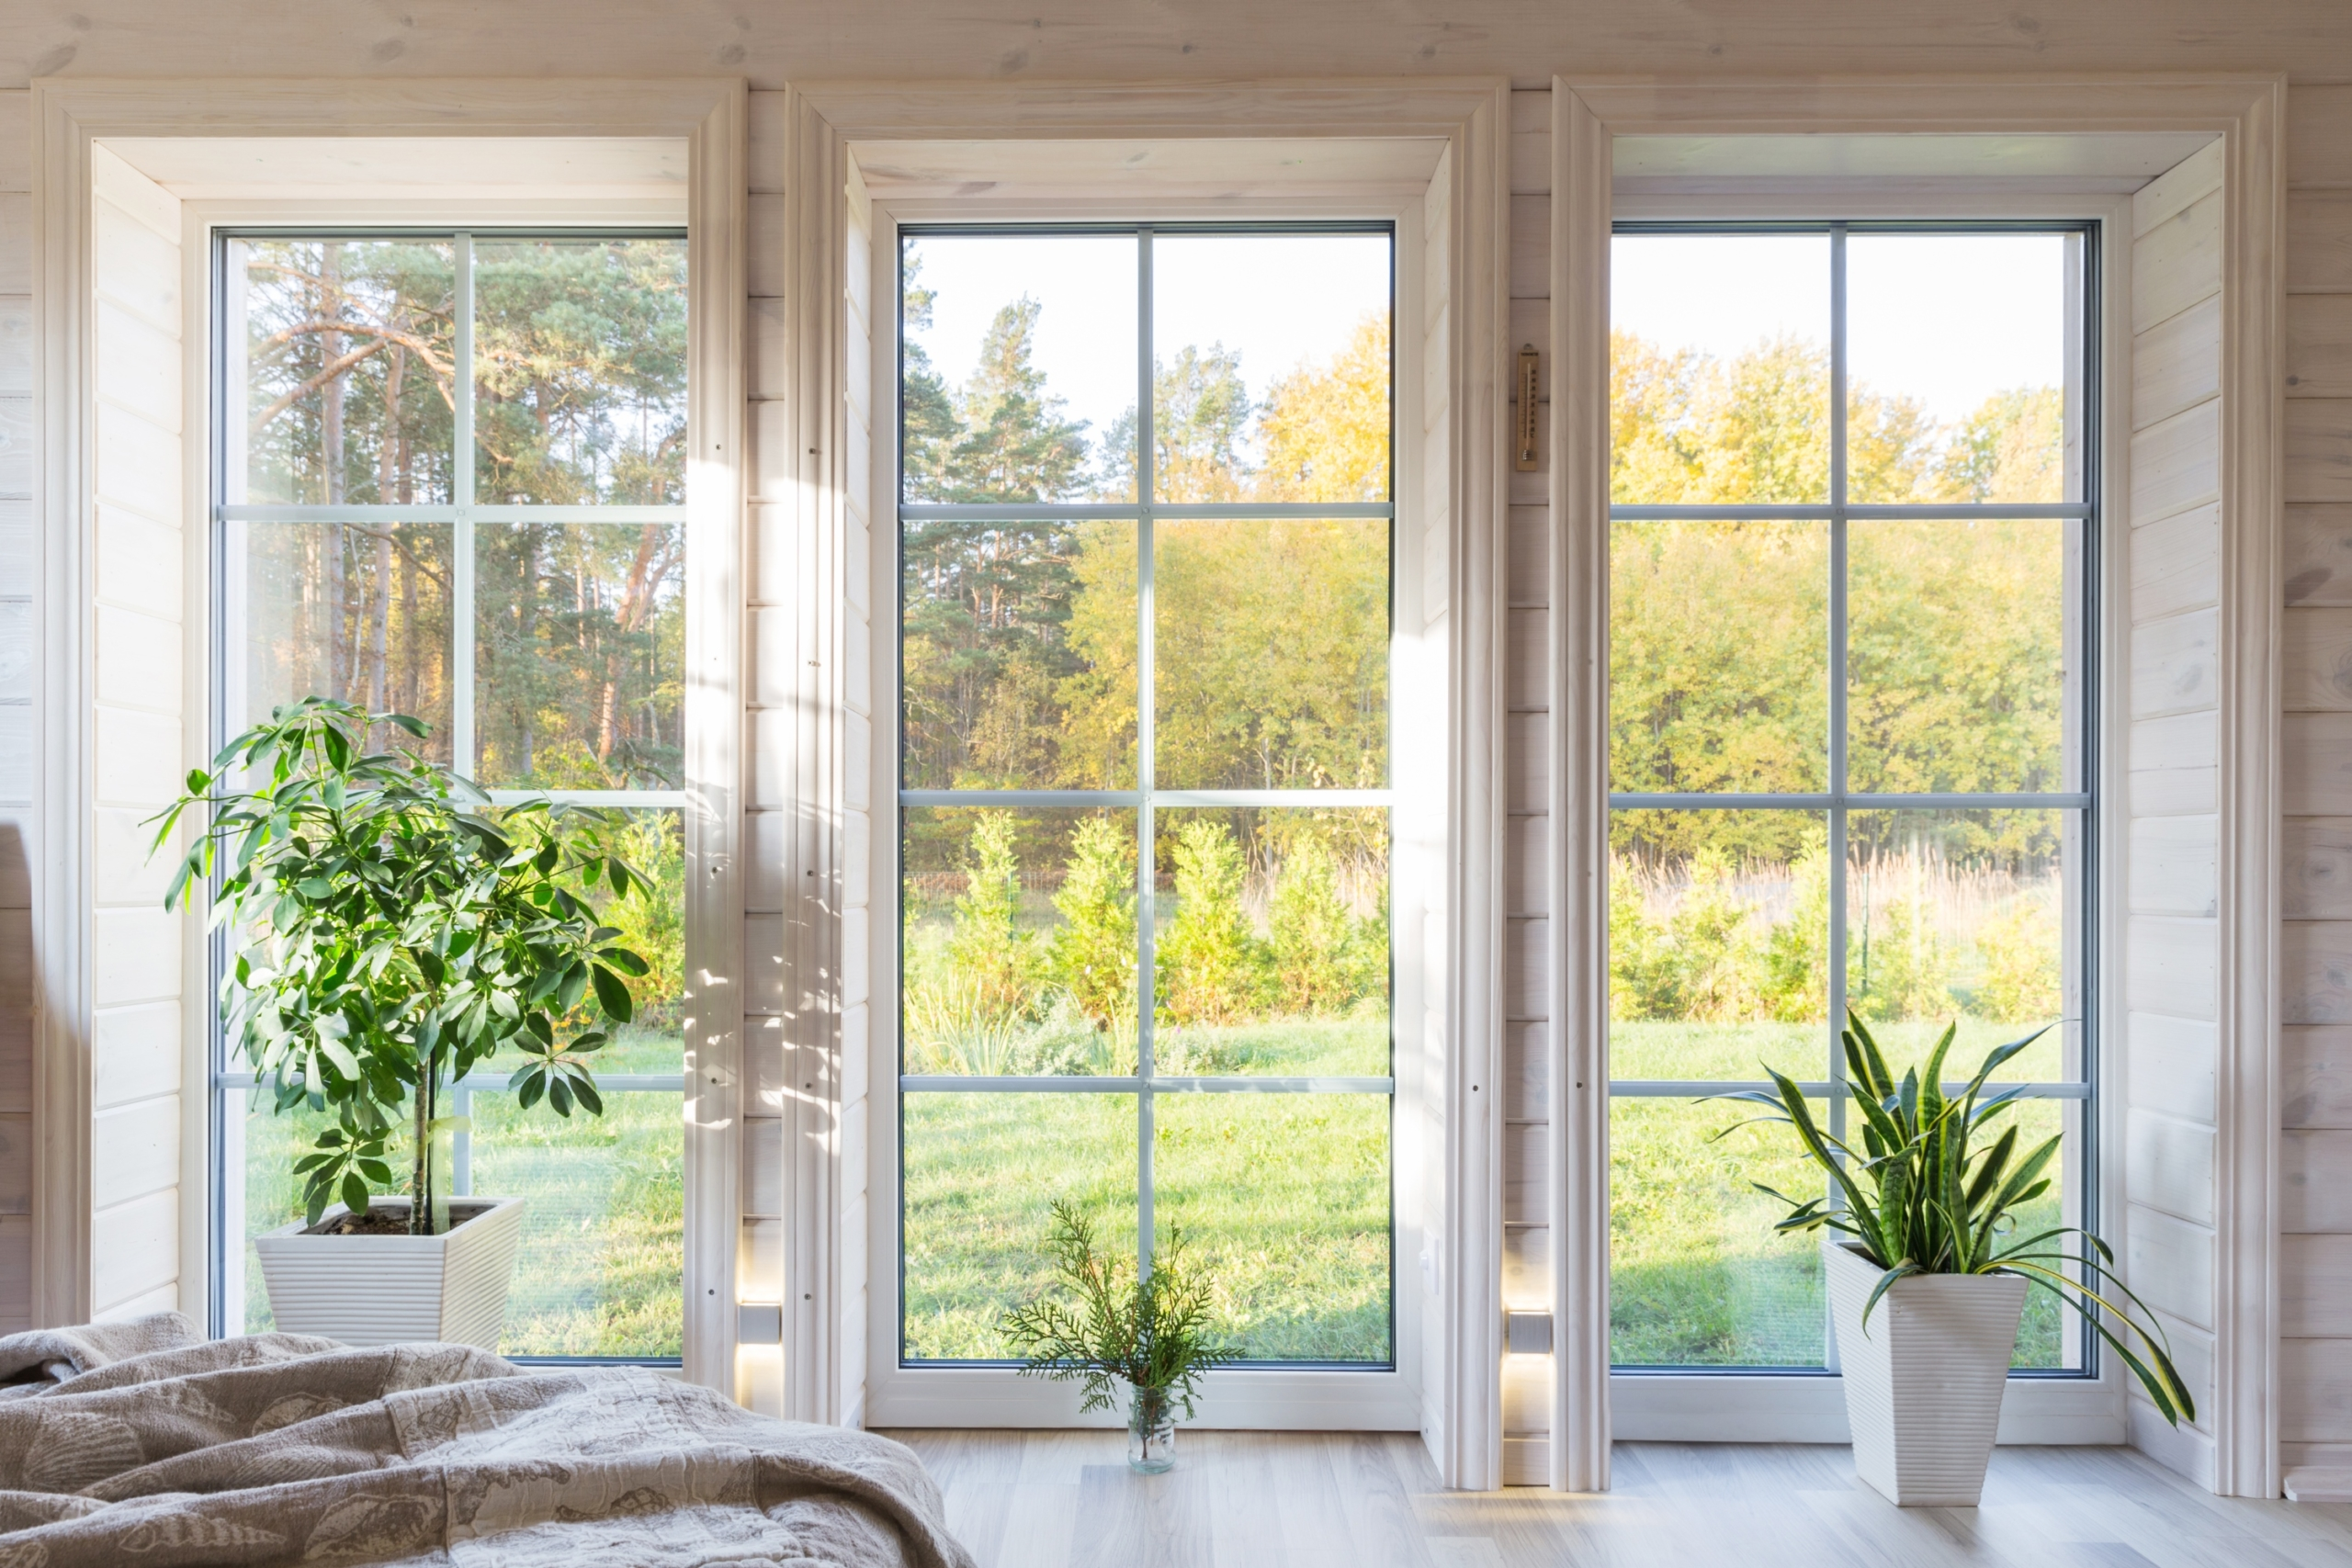 5 Compelling Reasons To Install Soundproof Windows at Home